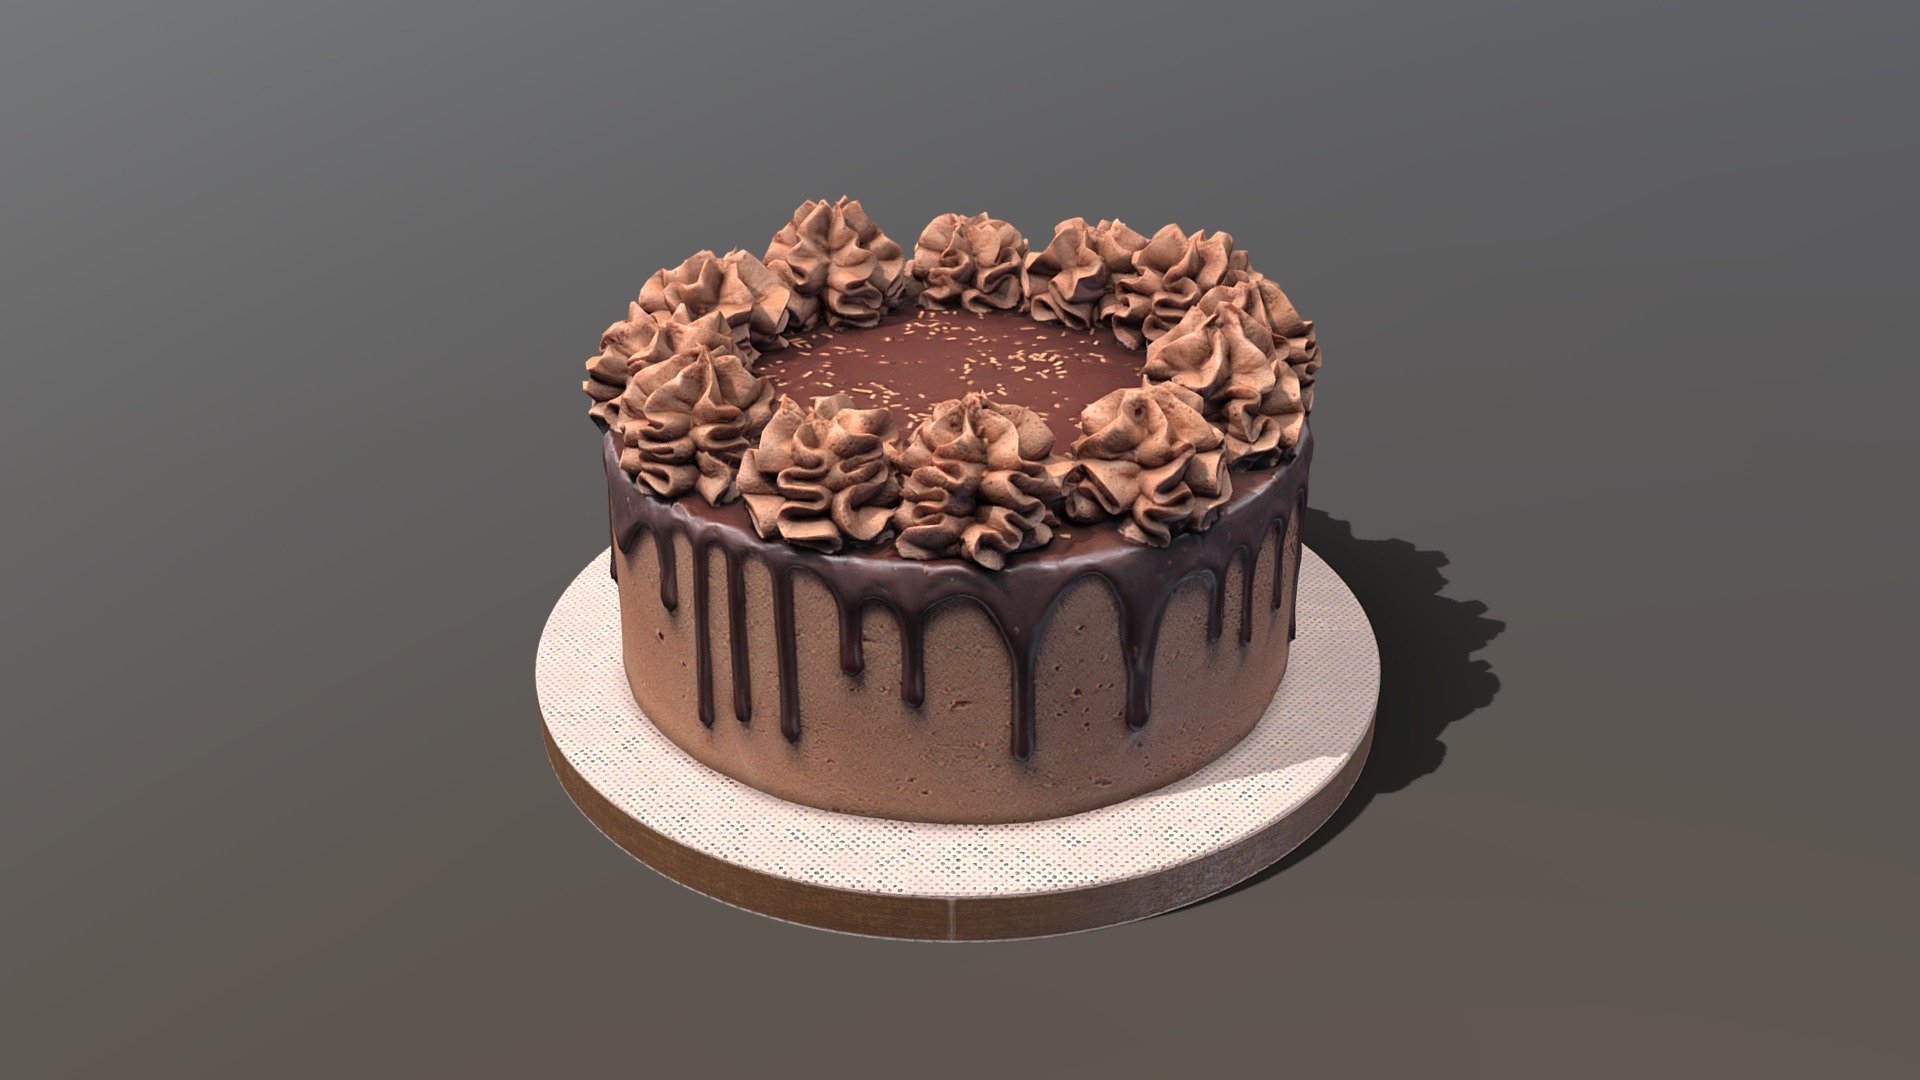 This premium Chocolate Gateau Cake model was created using photogrammetry which is made by CAKESBURG Premium Cake Shop in the UK. You can purchase real cake from this link: https://cakesburg.co.uk/products/chocolate-heaven-cake?_pos=1&amp;_sid=25d1b3fb8&amp;_ss=r

Textures 4096*4096px PBR photoscan-based materials Base Color, Normal, Roughness, Specular)

Click here for the cut &amp; slice version.

**Click here for a slice of cake model 3d model